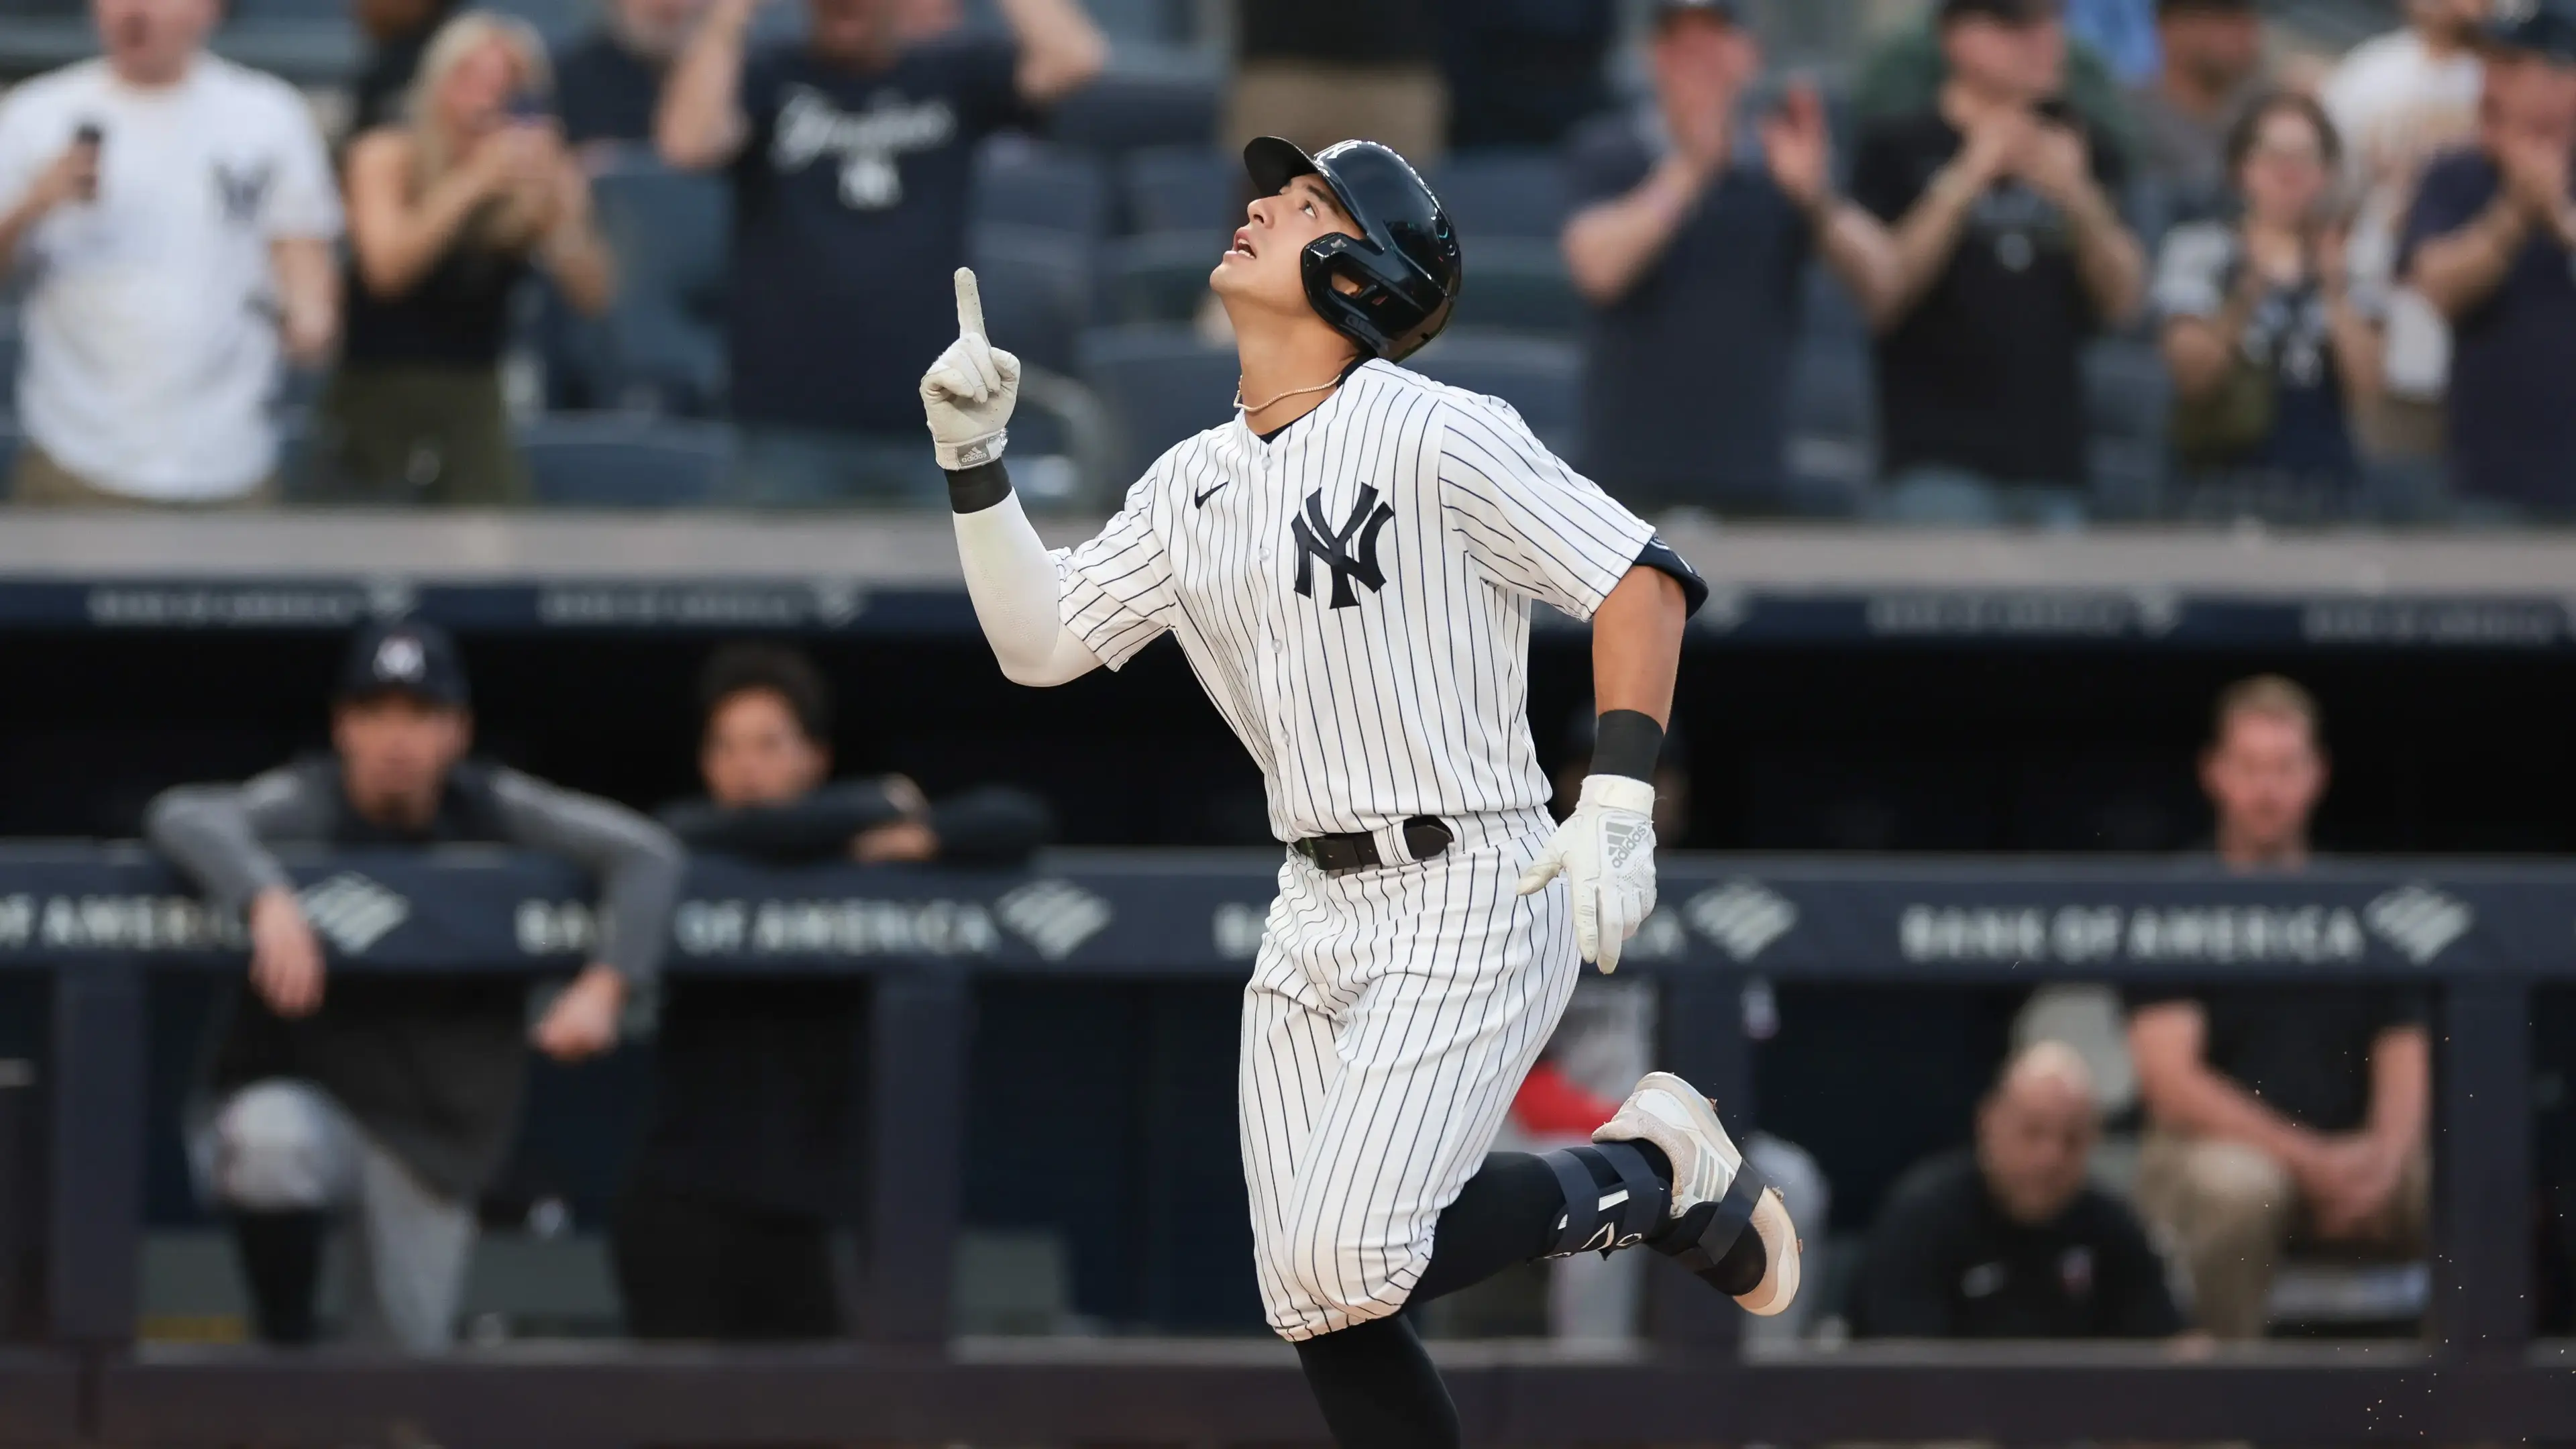 Apr 14, 2023; Bronx, New York, USA; New York Yankees shortstop Anthony Volpe (11) celebrates after hitting a solo home run during the first inning against the Minnesota Twins at Yankee Stadium. Mandatory Credit: Vincent Carchietta-USA TODAY Sports / © Vincent Carchietta-USA TODAY Sports